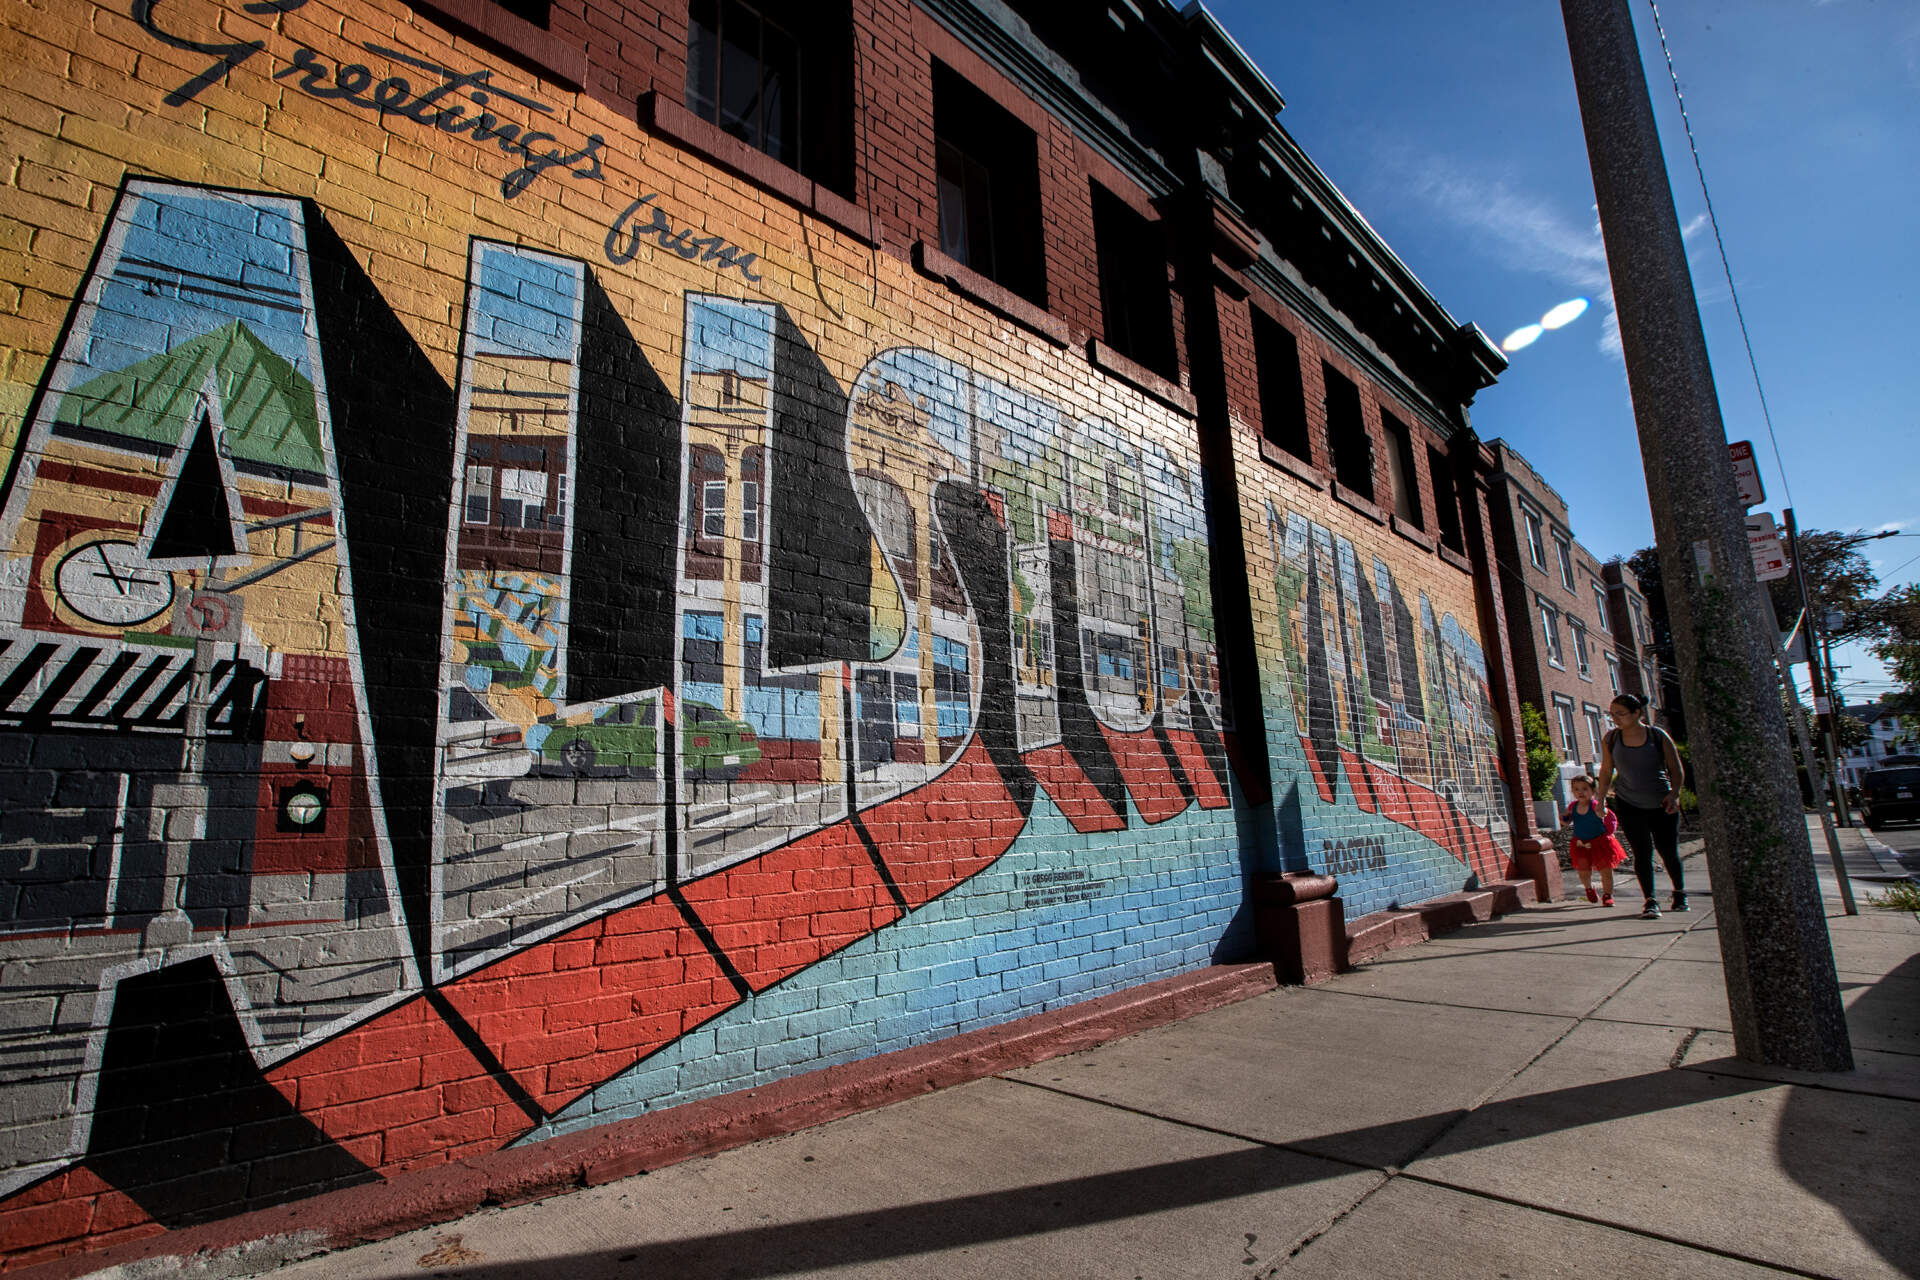 A mother and her daughter walk past the “Greetings from Allston Village” mural on Farrington Street. (Jesse Costa/WBUR)